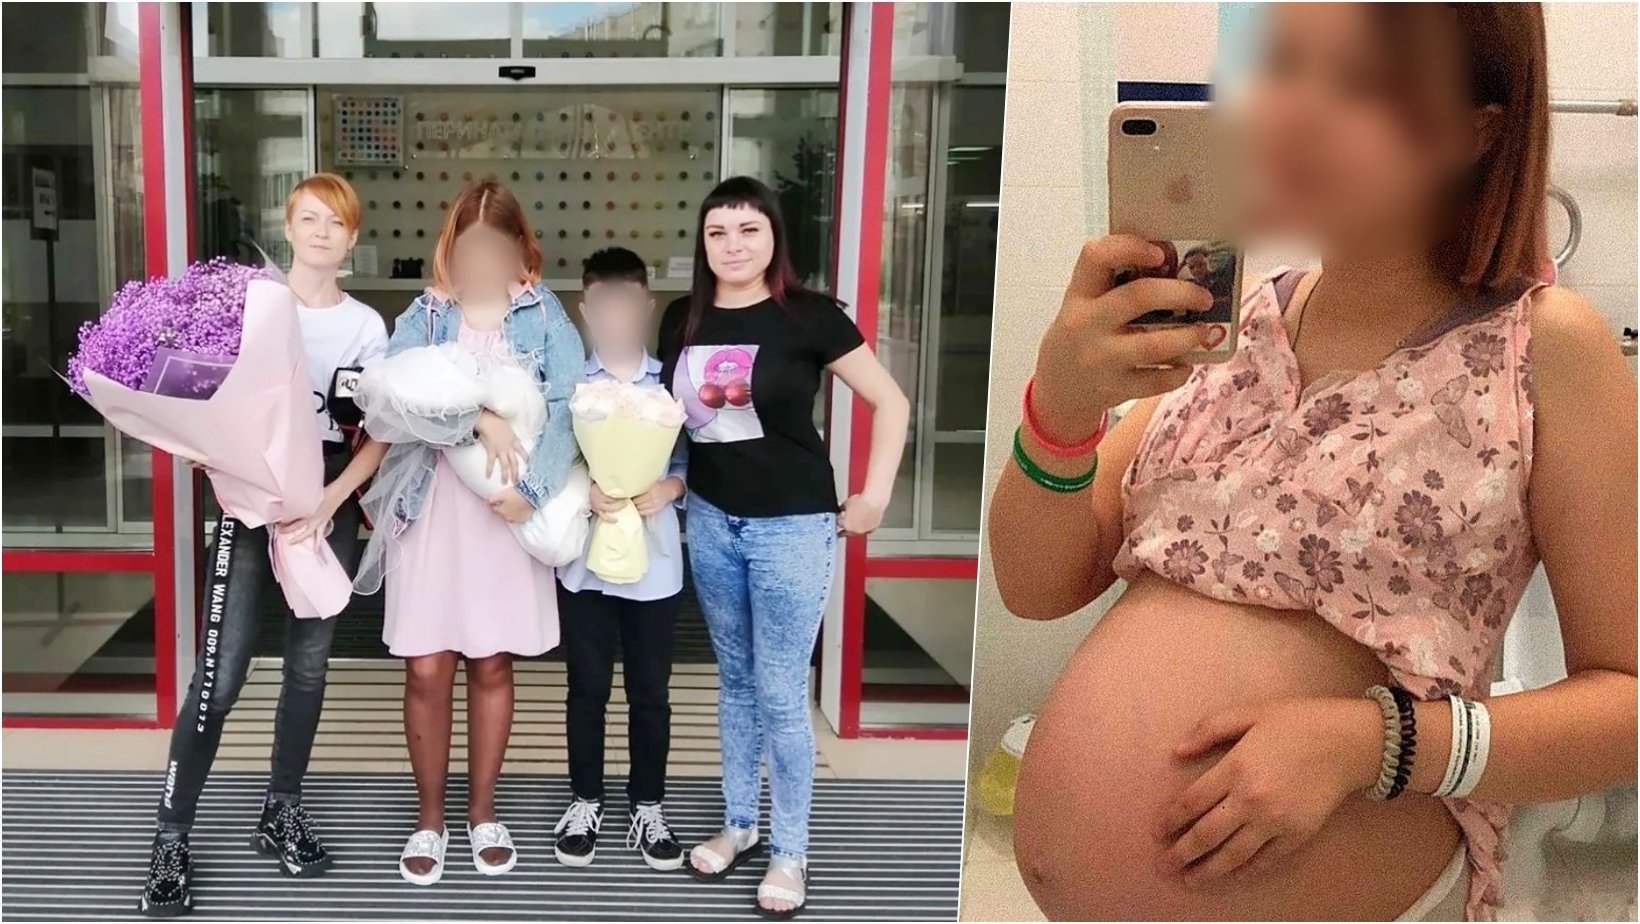 6 facebook cover 4.jpg?resize=412,232 - Teenage Girl Who Previously Claims She Gave Birth To 10-Year-Old Boy’s Baby Announced Second Pregnancy